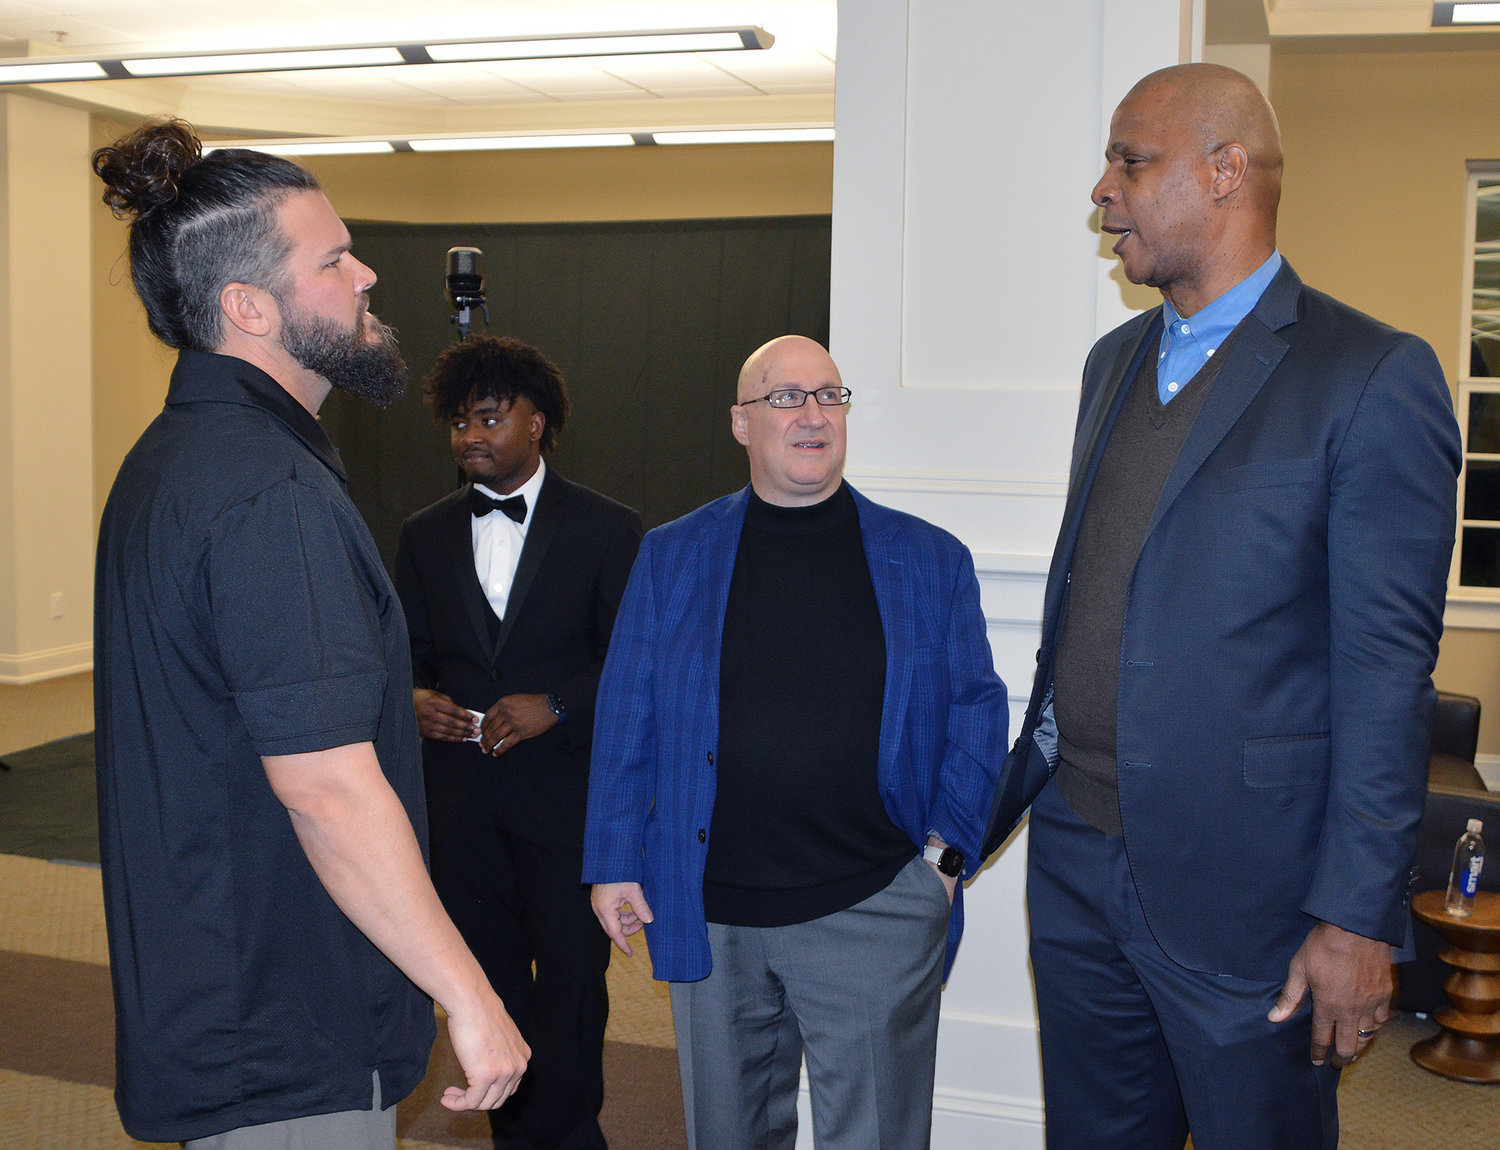 Darryl Strawberry, his manager John Luppo, and Shorter University head baseball coach Wes Timmons, left, chat during the President’s Gala in Rome, Ga., Dec. 1, 2022. Shorter second baseman and communicatons major Blake Baldwin is second from left. (Index/Henry Durand)